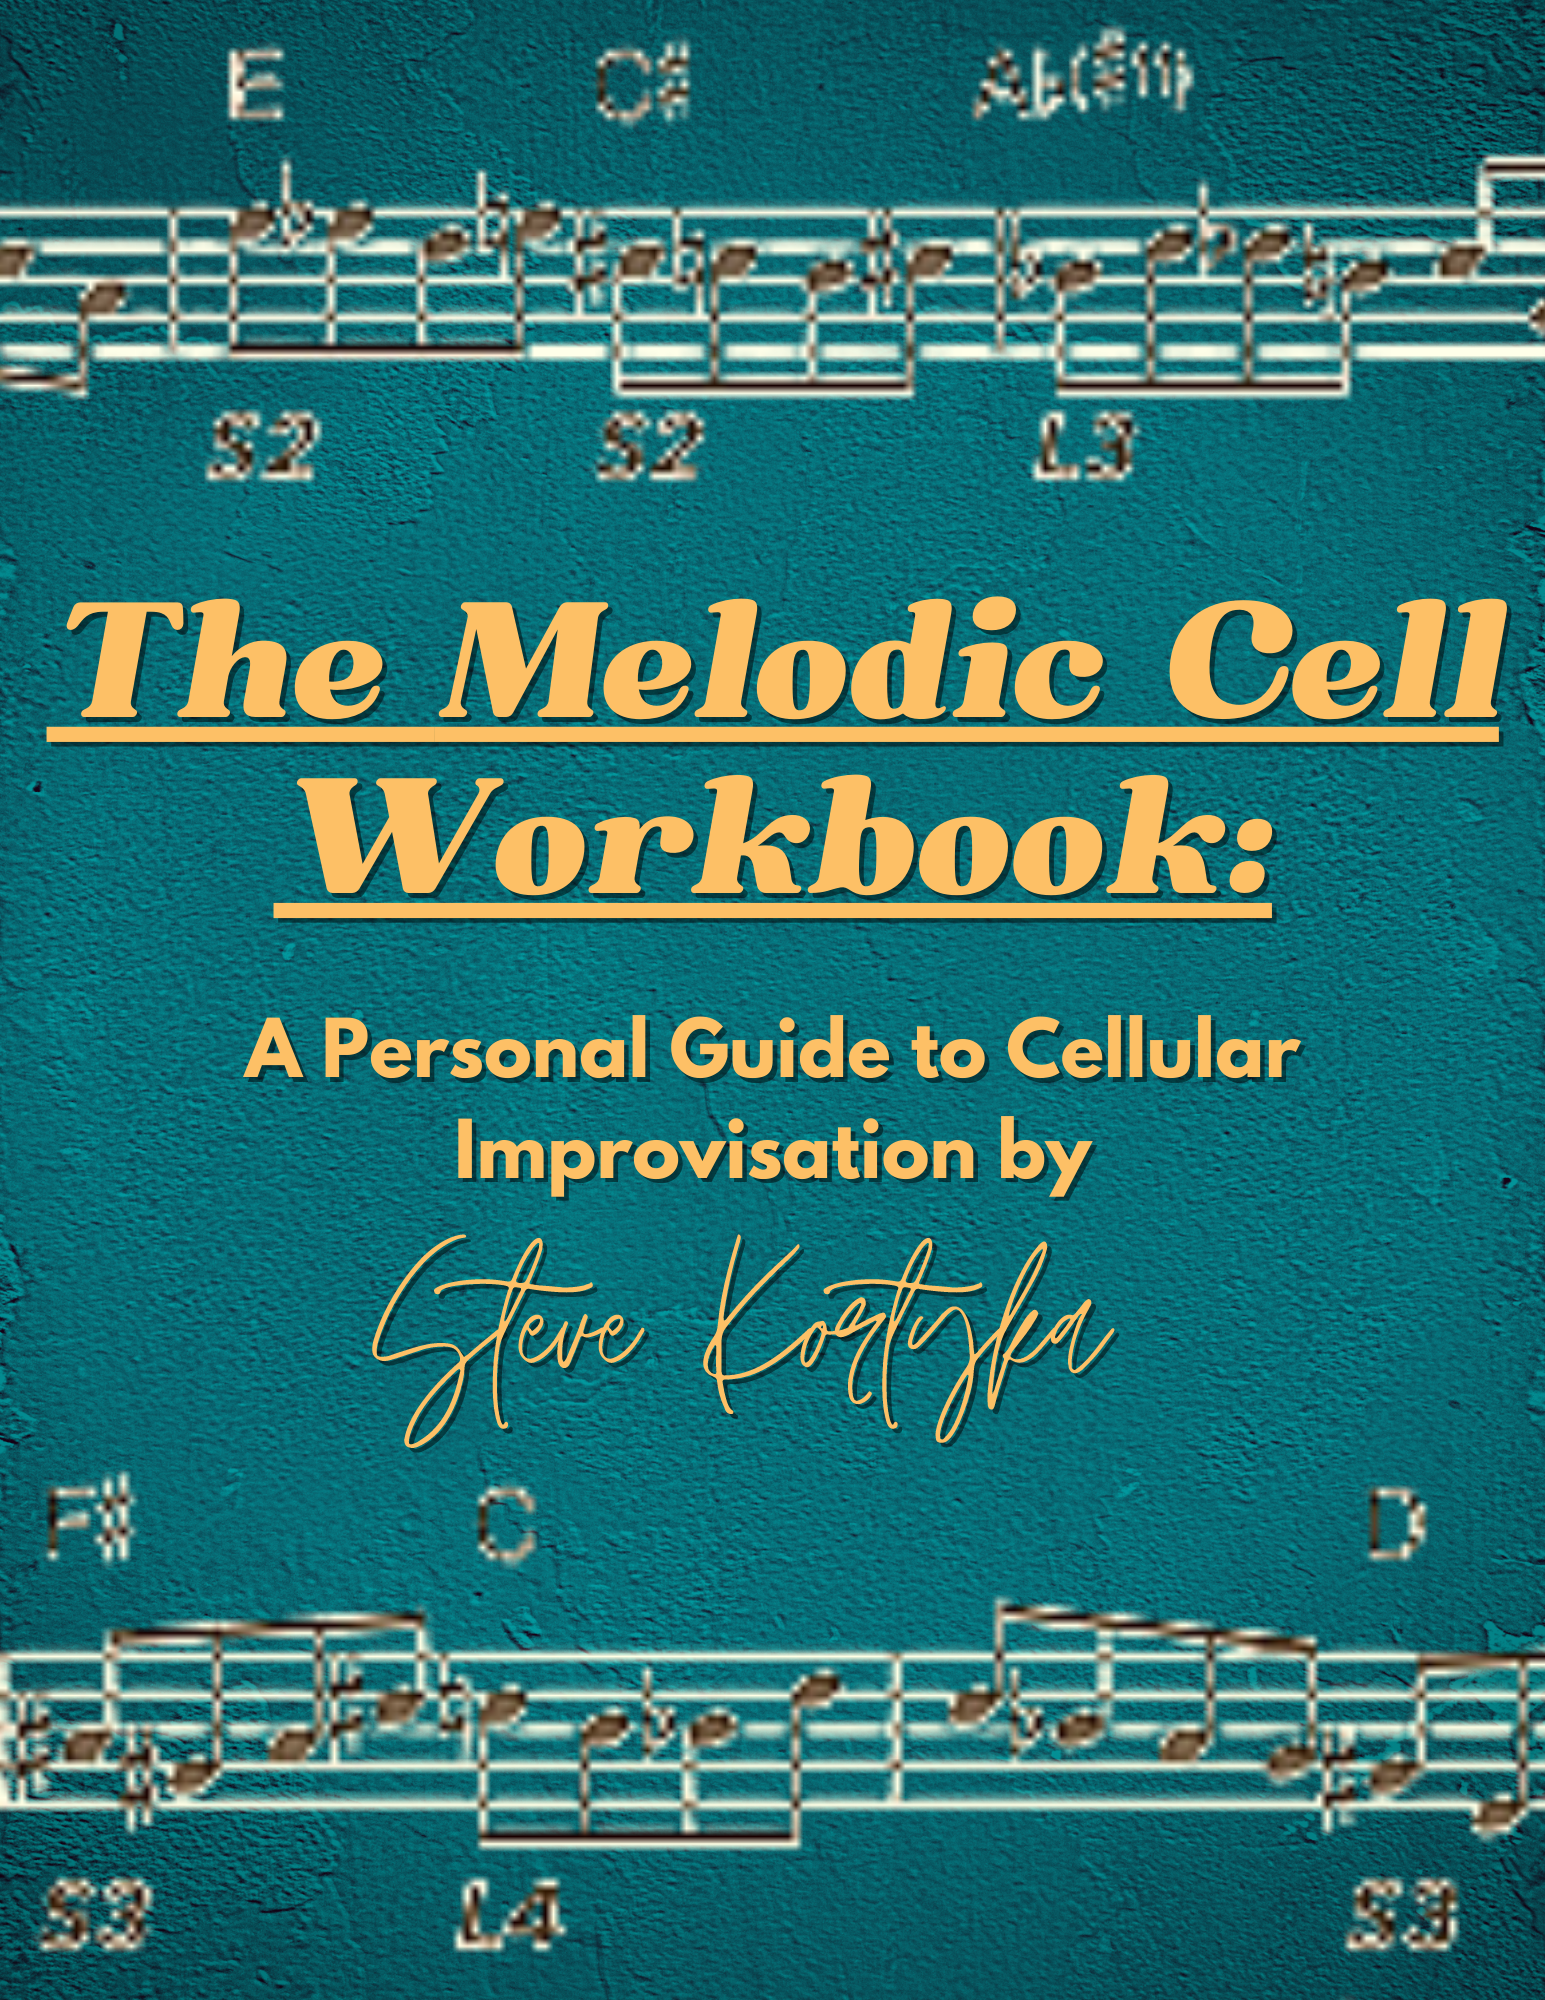 The Melodic Cell Workbook (Video Course)